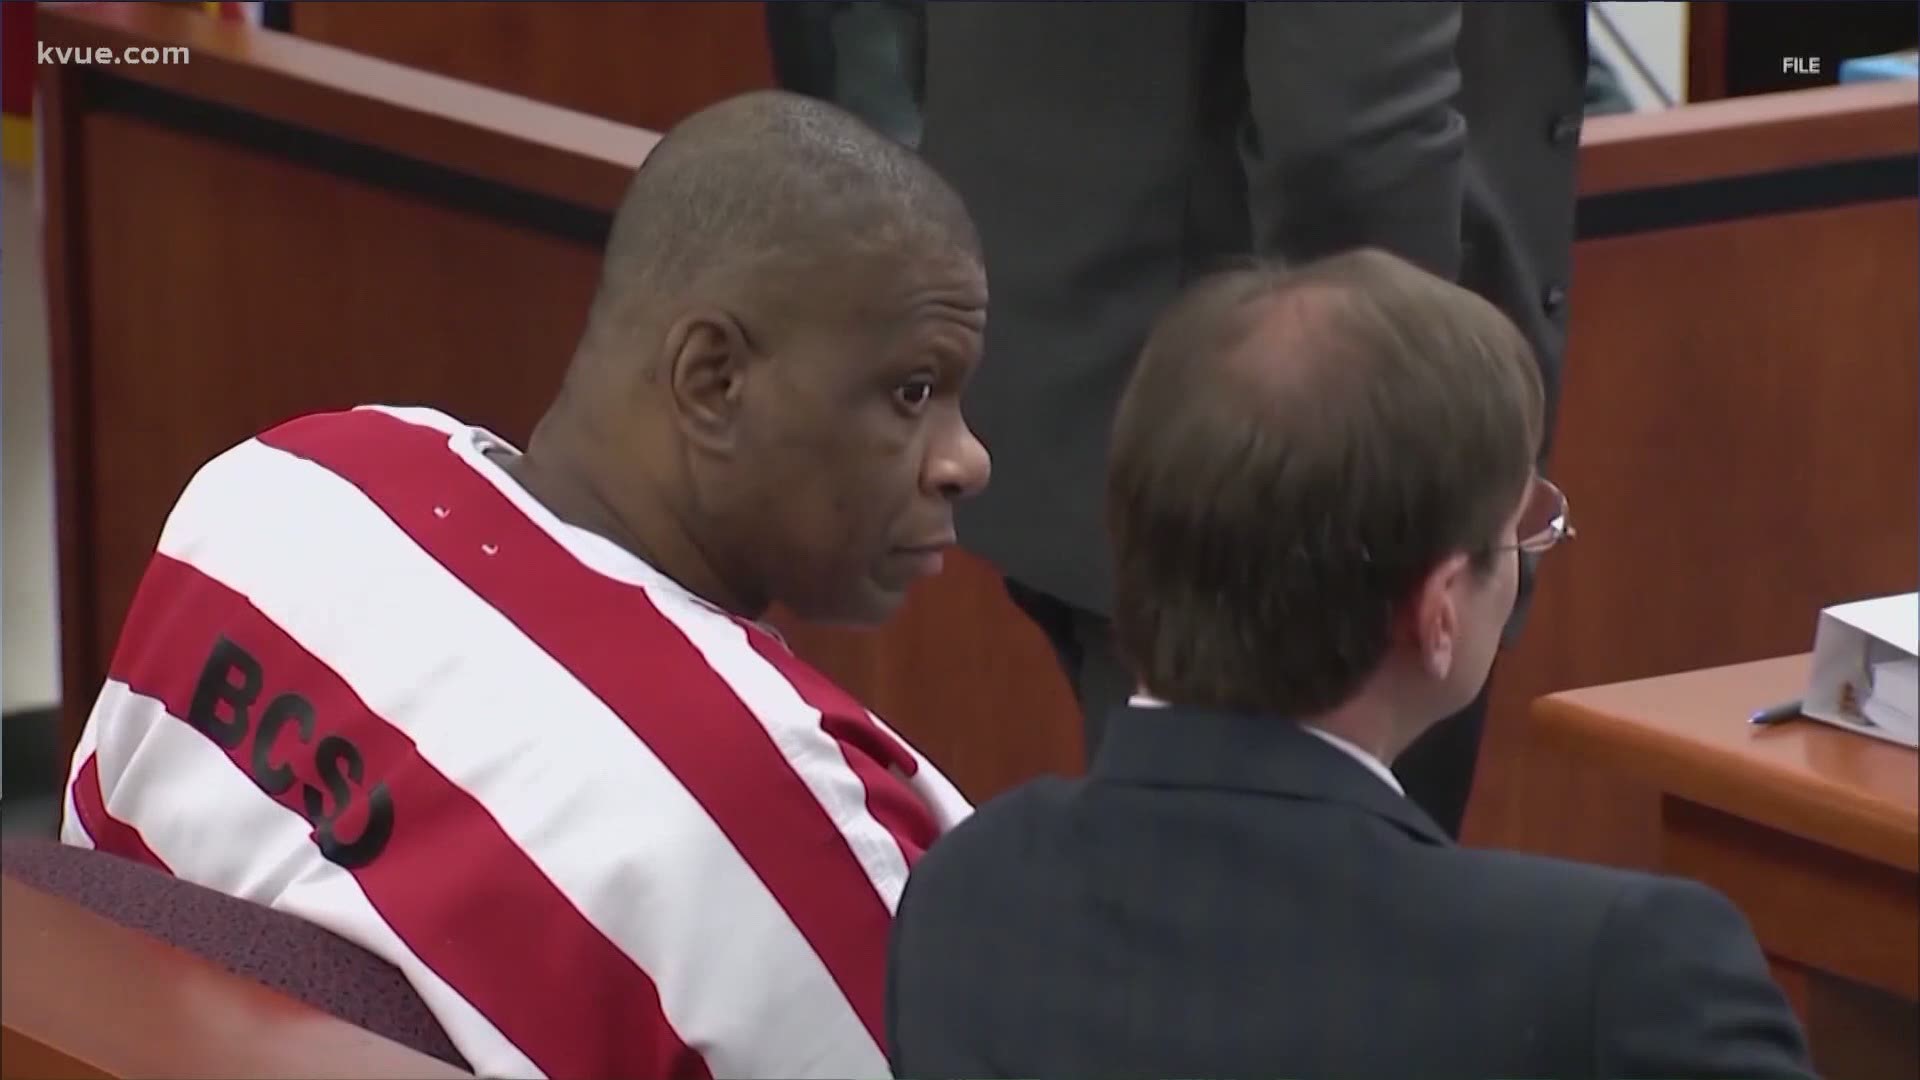 Death row inmate Rodney Reed is getting his day in court as he fights for a new trial. Reed is doing time for the 1996 abduction, rape and murder of Stacey Stites.